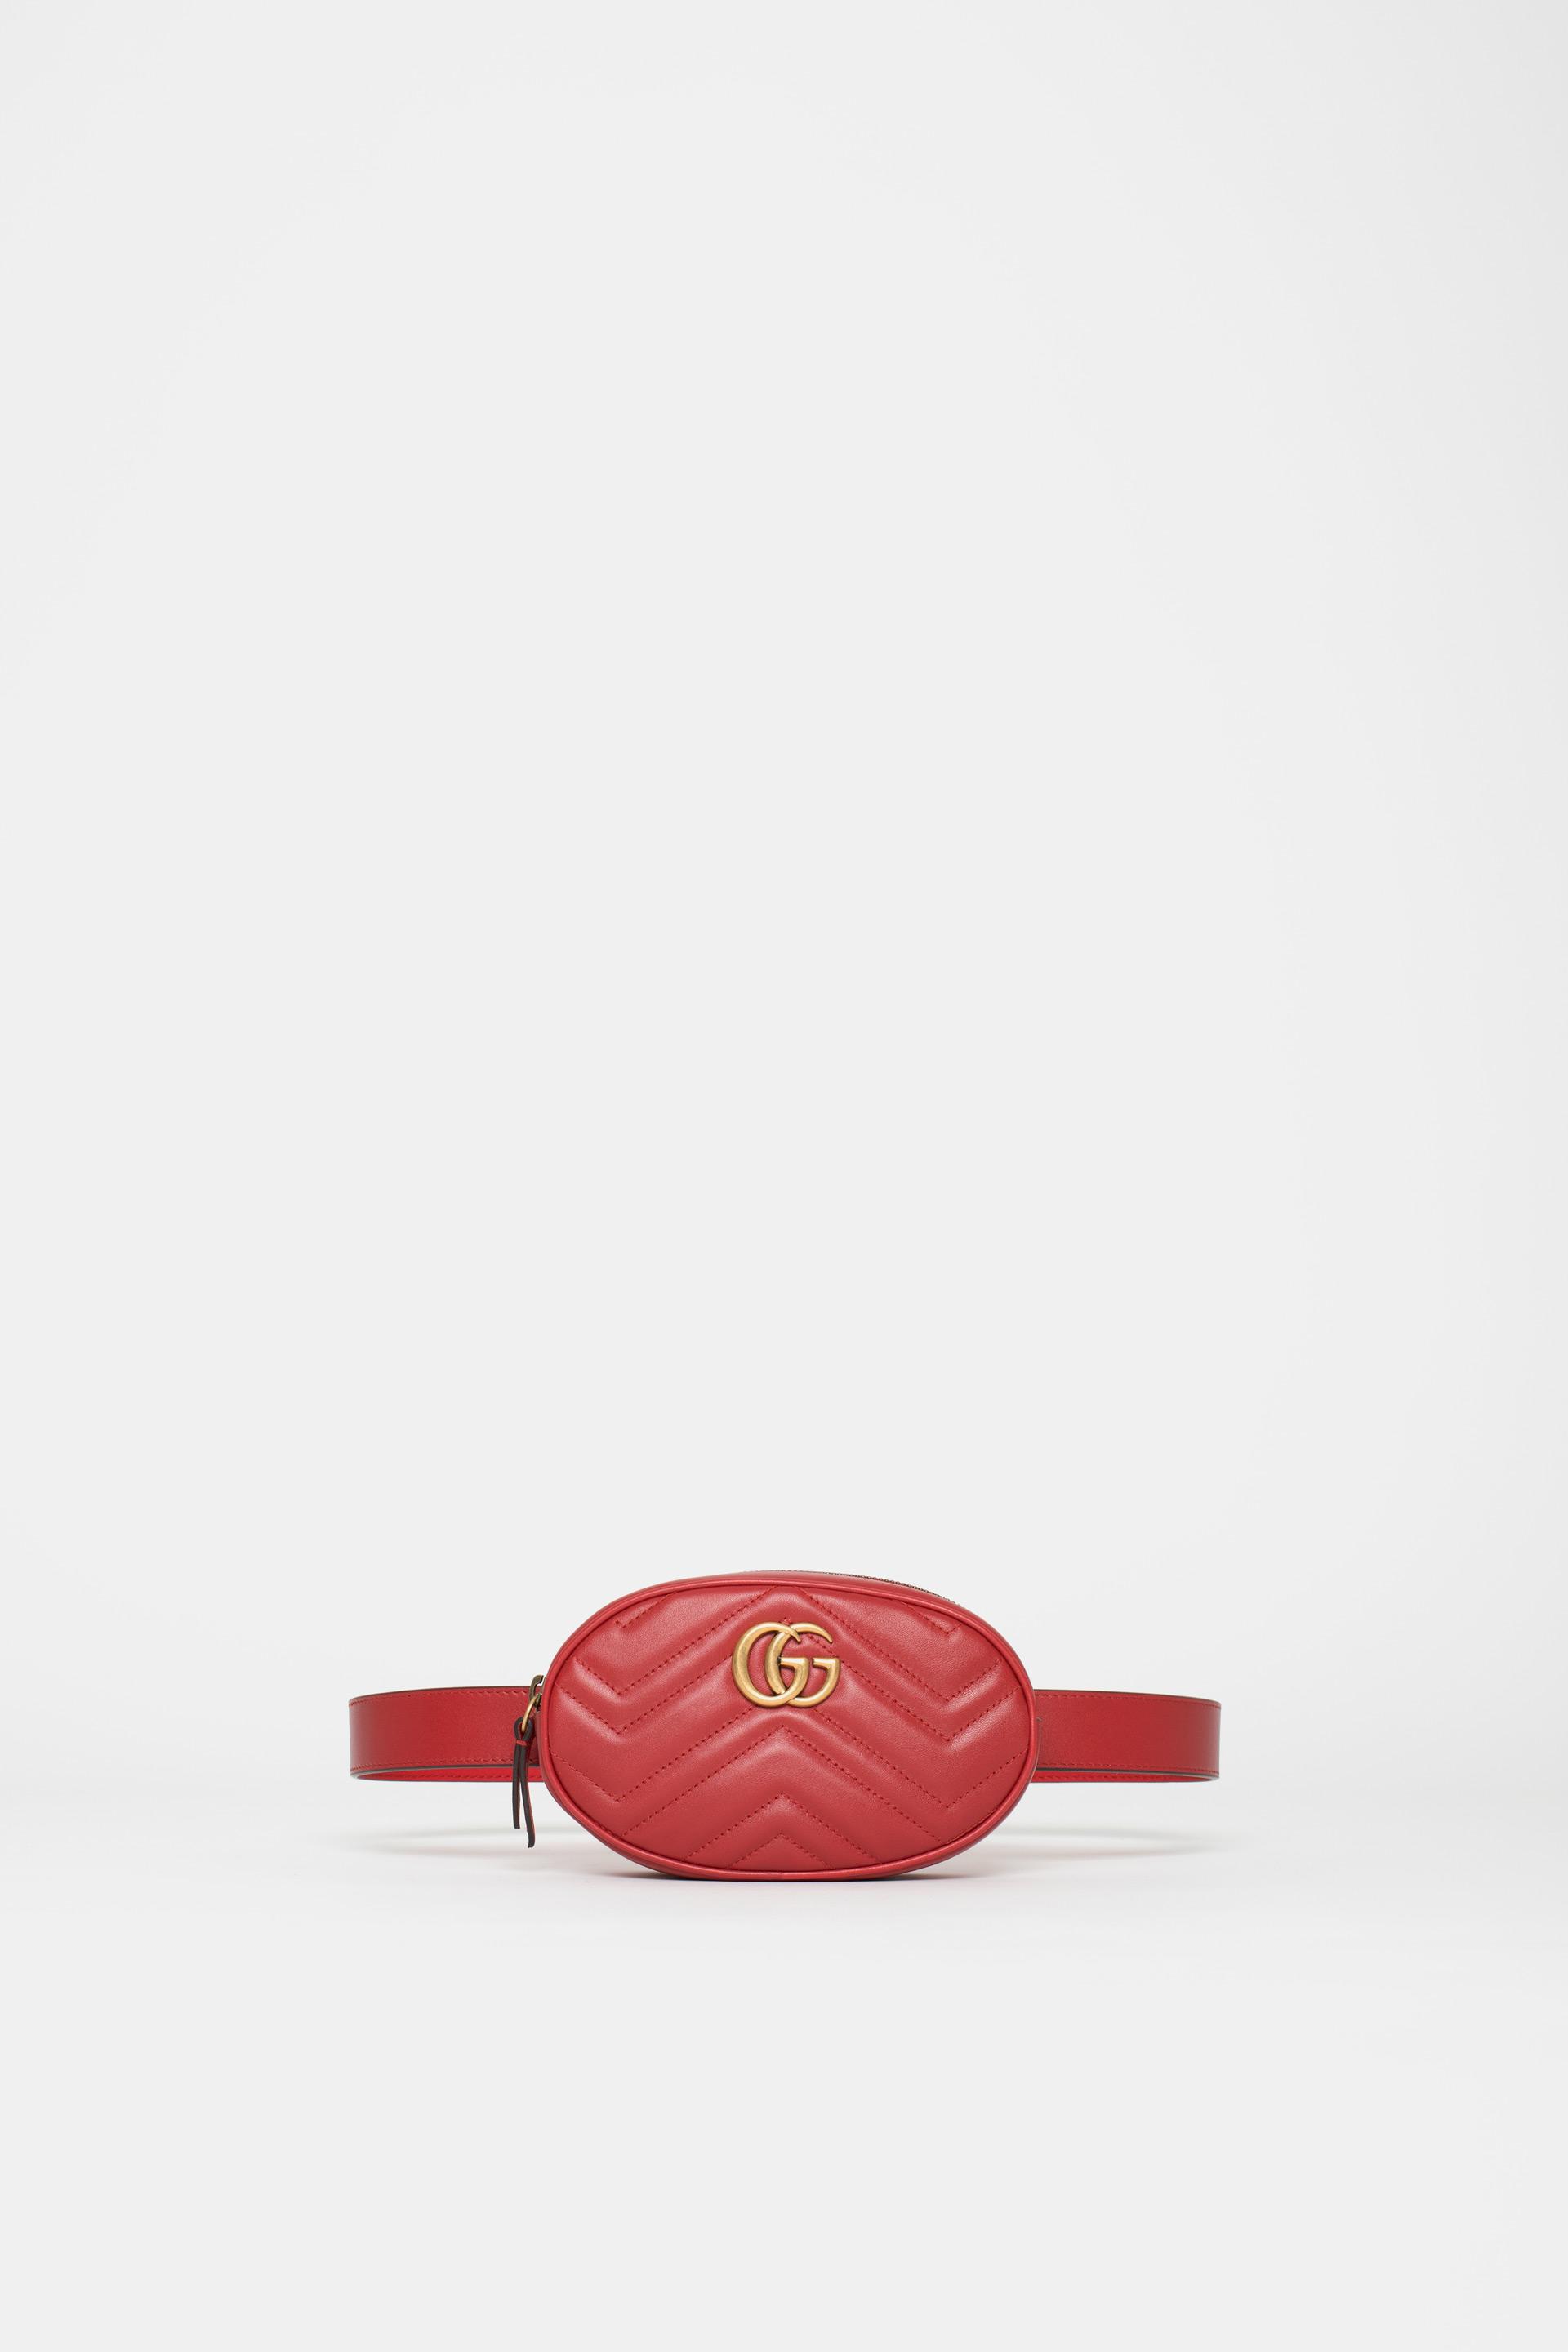 Gucci Leather Marmont Matelass Belt Bag in Pink - Lyst